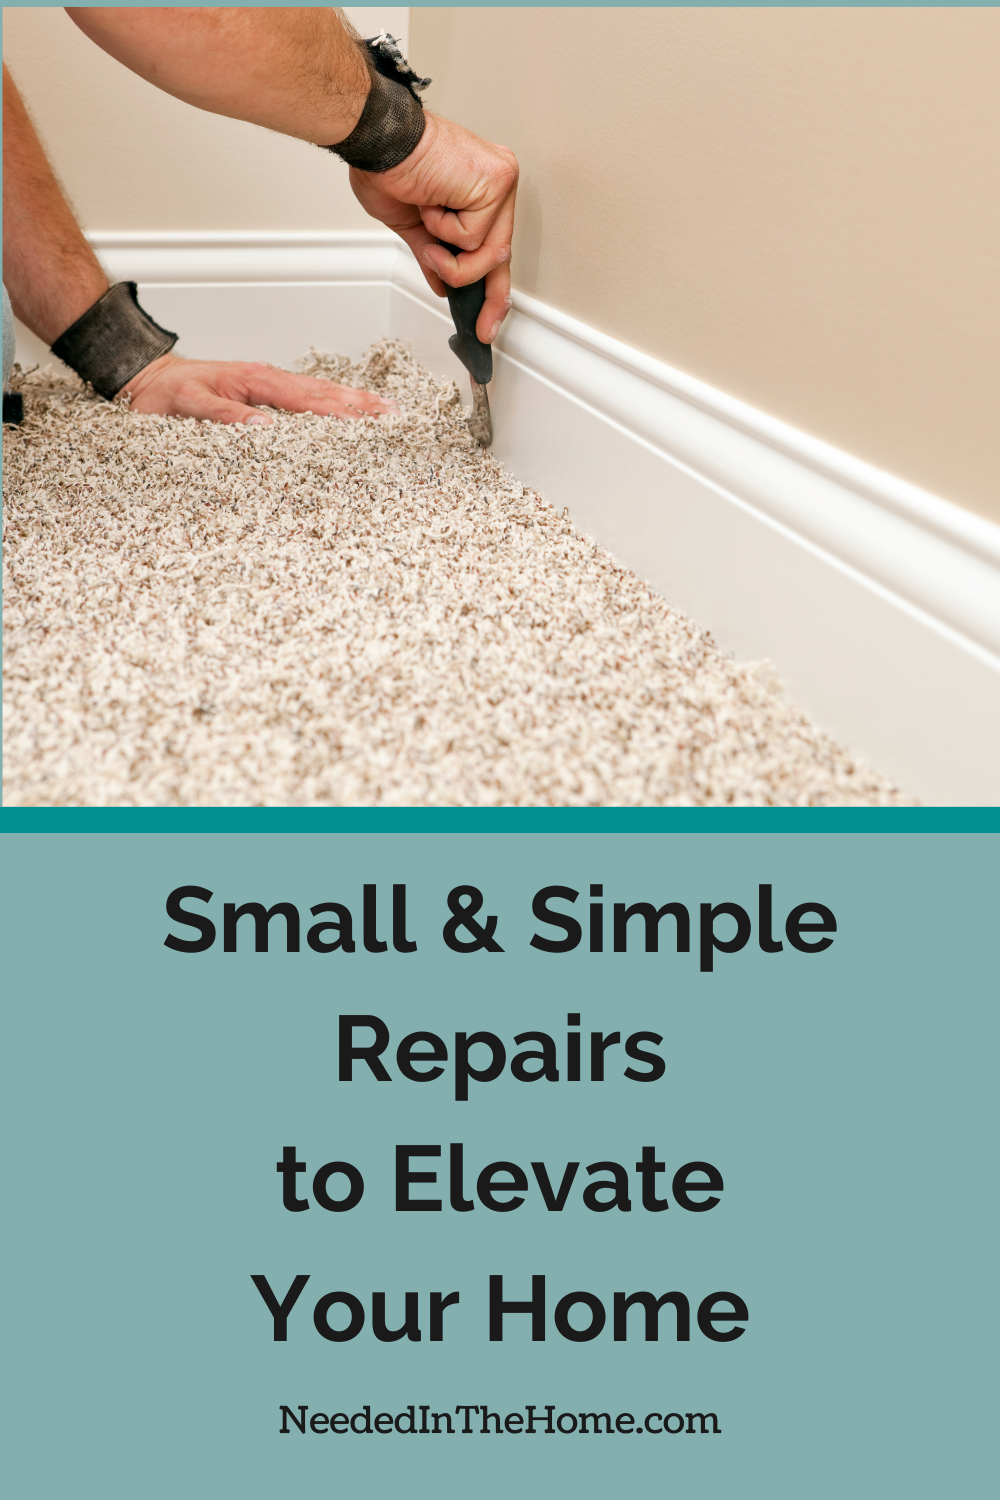 man is using tool to cut carpet to fit corner properly in home remodel small and simple repairs to elevate your home neededinthehome